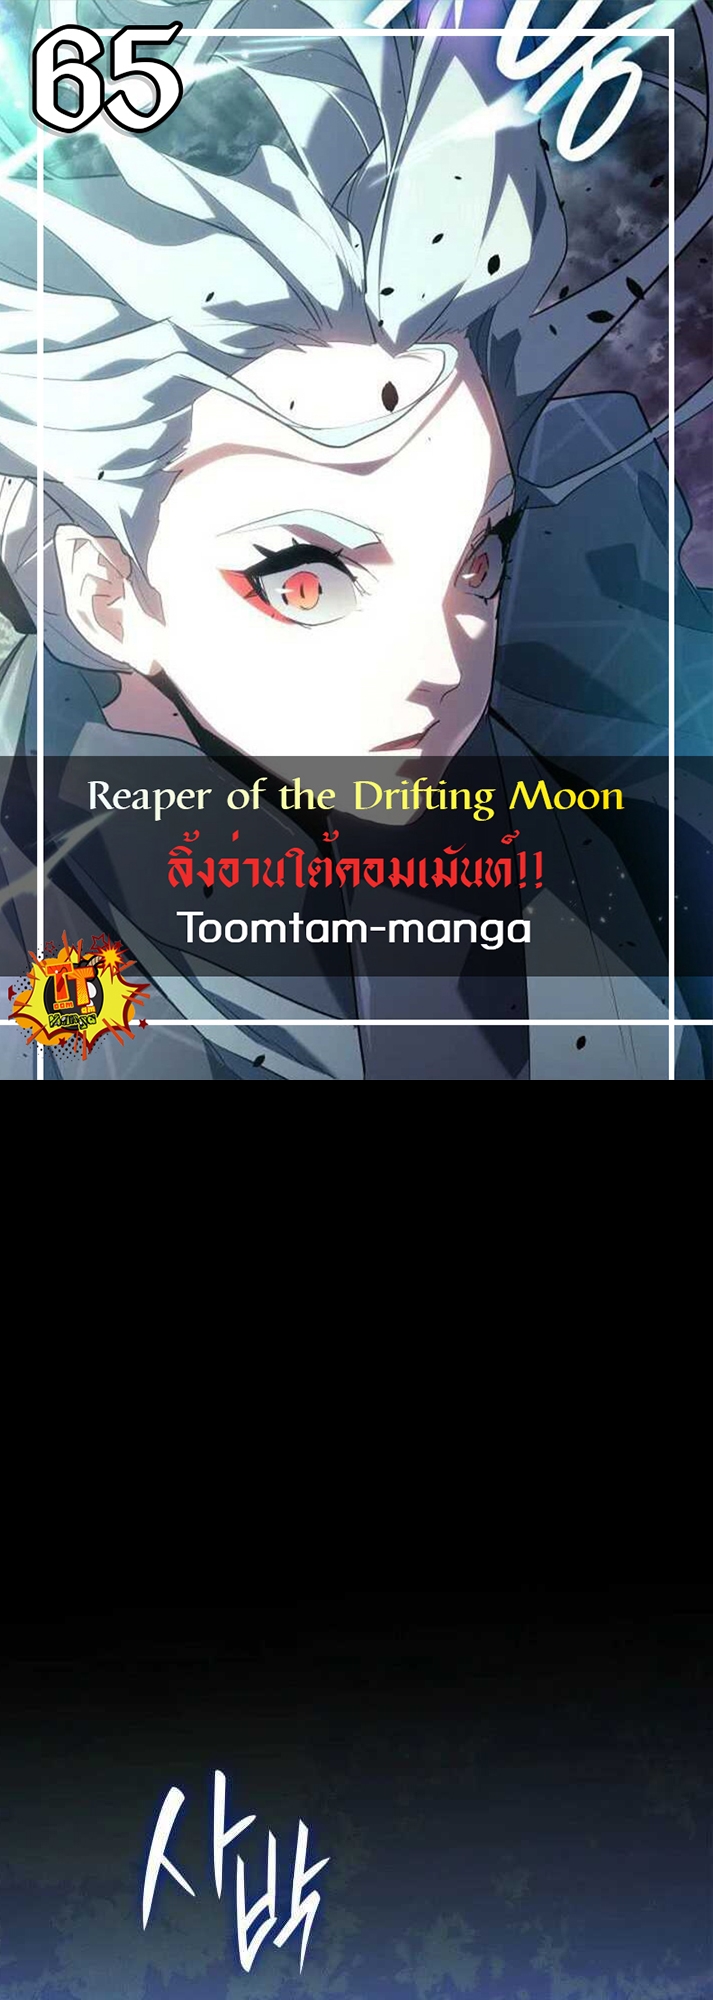 Reaper of the Drifting Moon 65 06 12 25660001